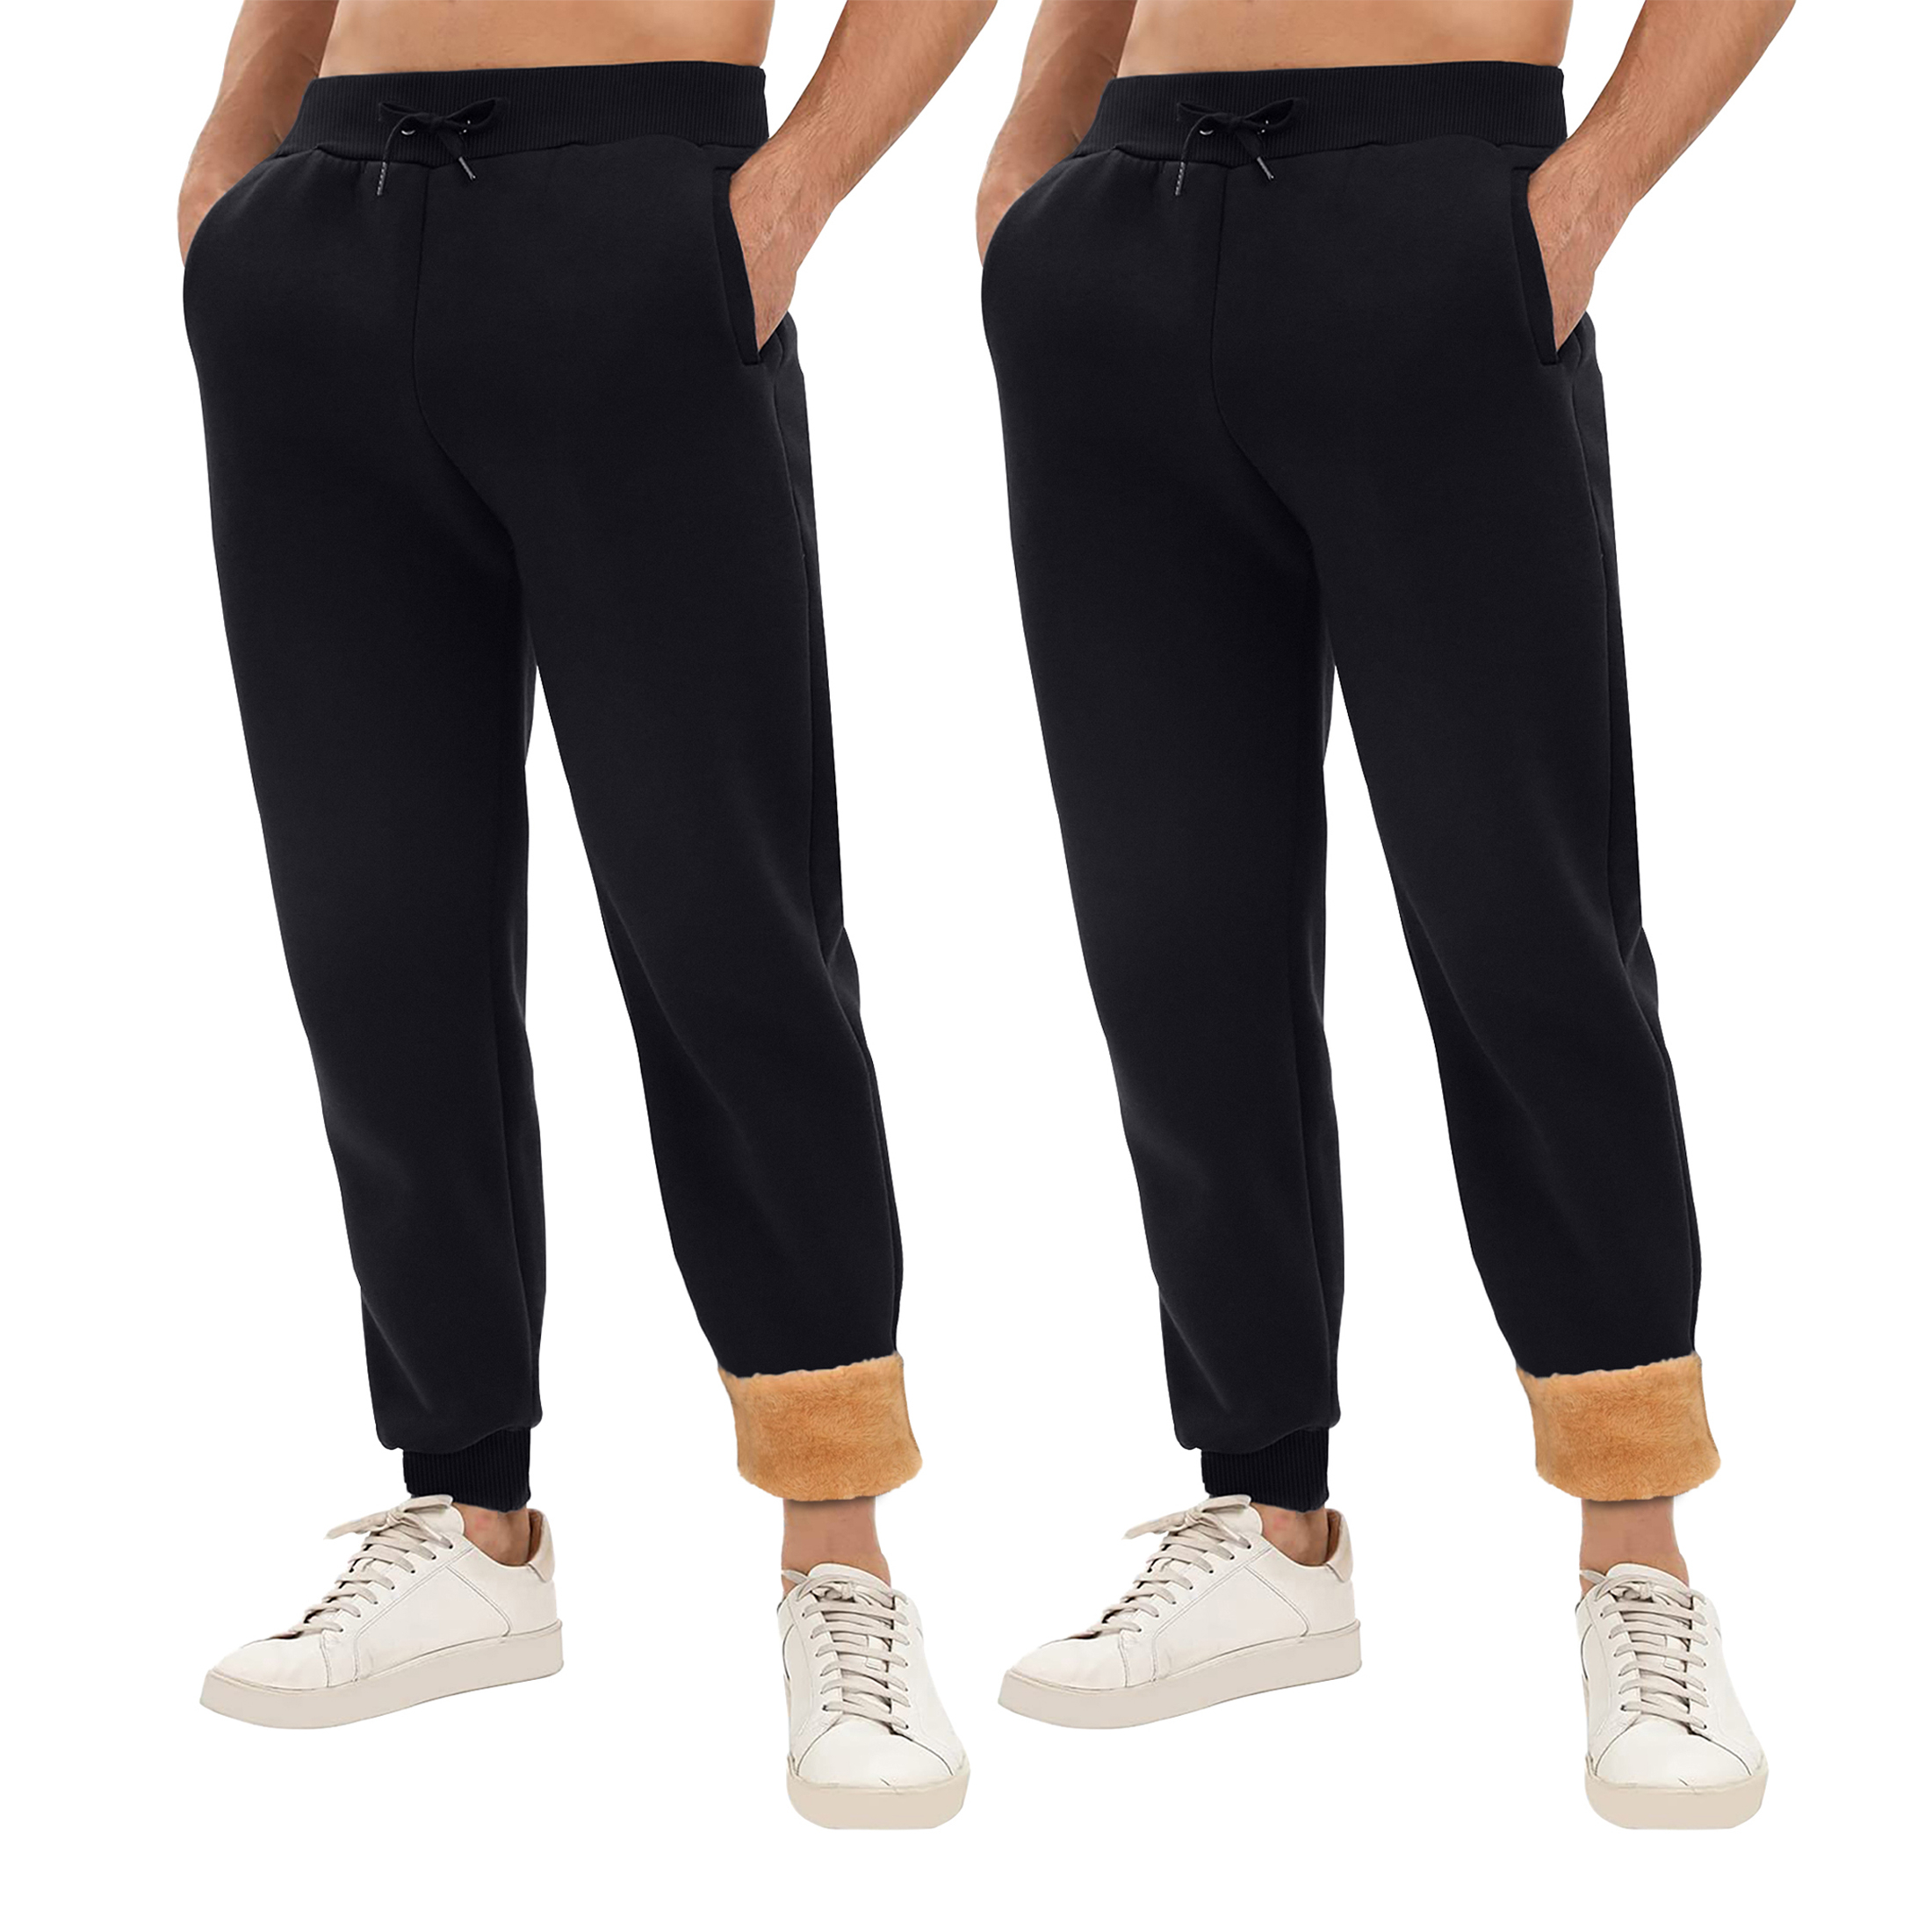 2-Pack: Men's Winter Warm Thick Sherpa Lined Jogger Track Pants With Pockets - Black, Large